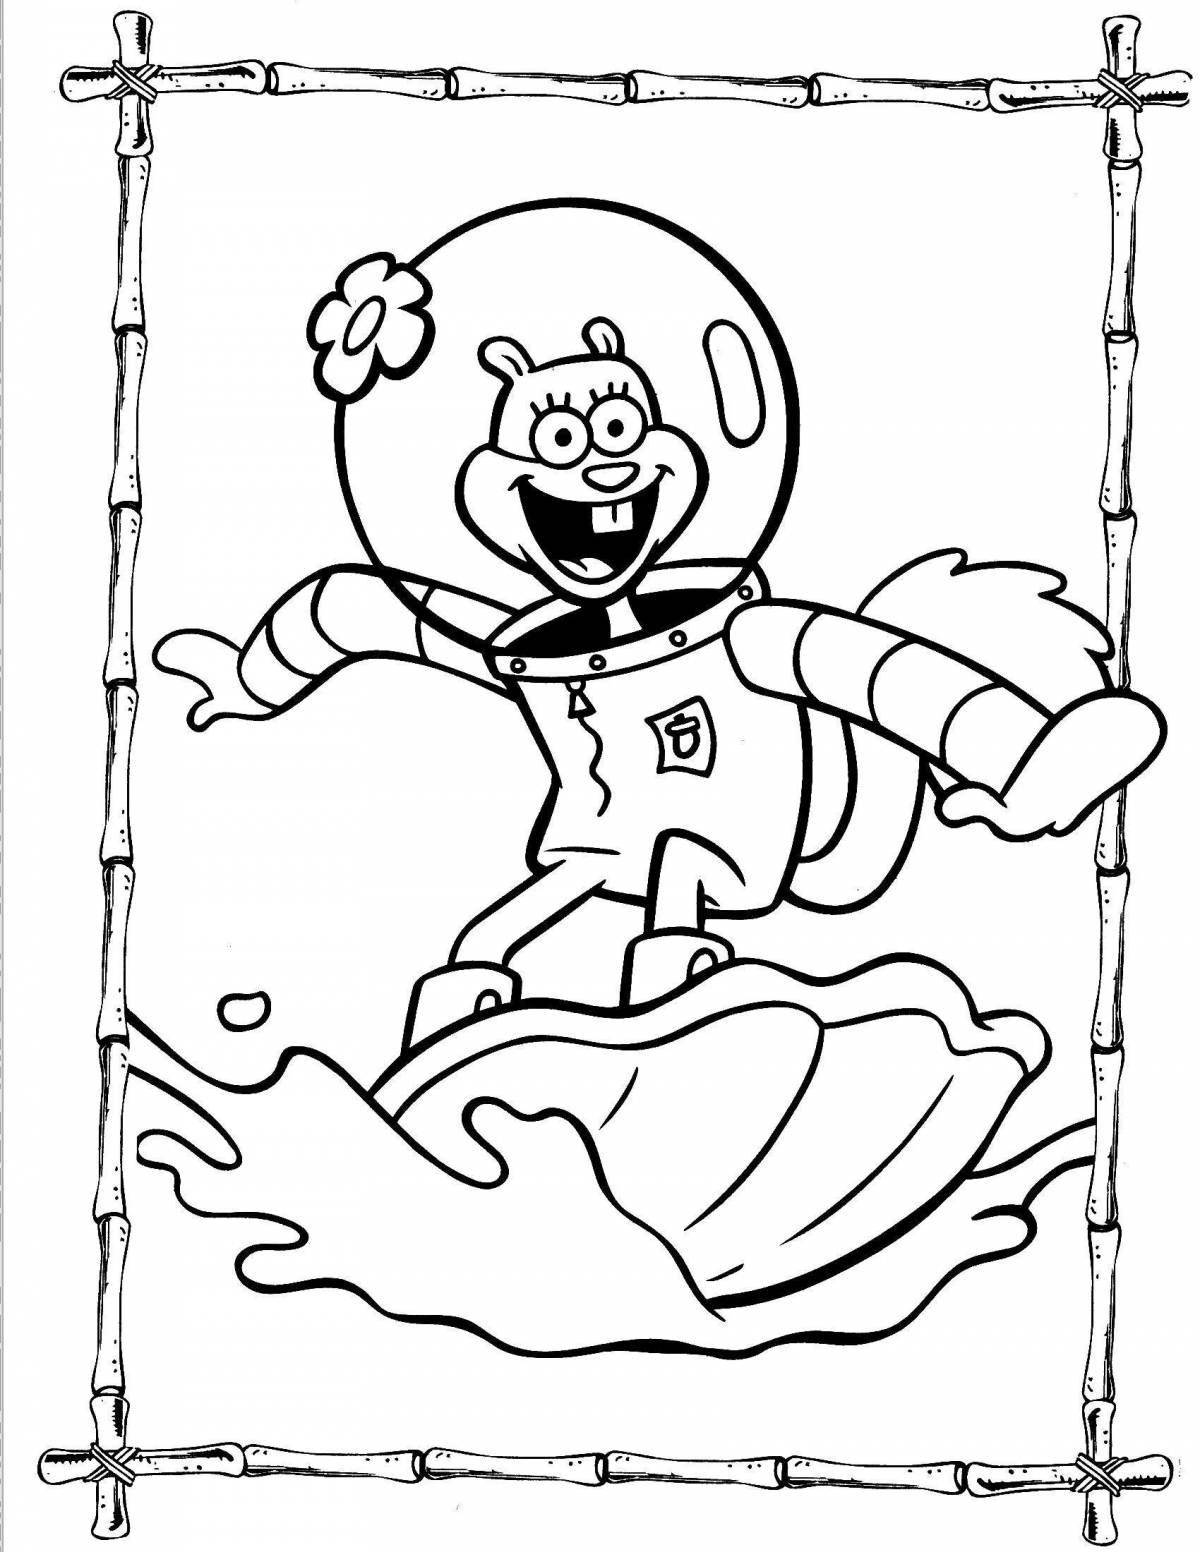 Sandy shining coloring page